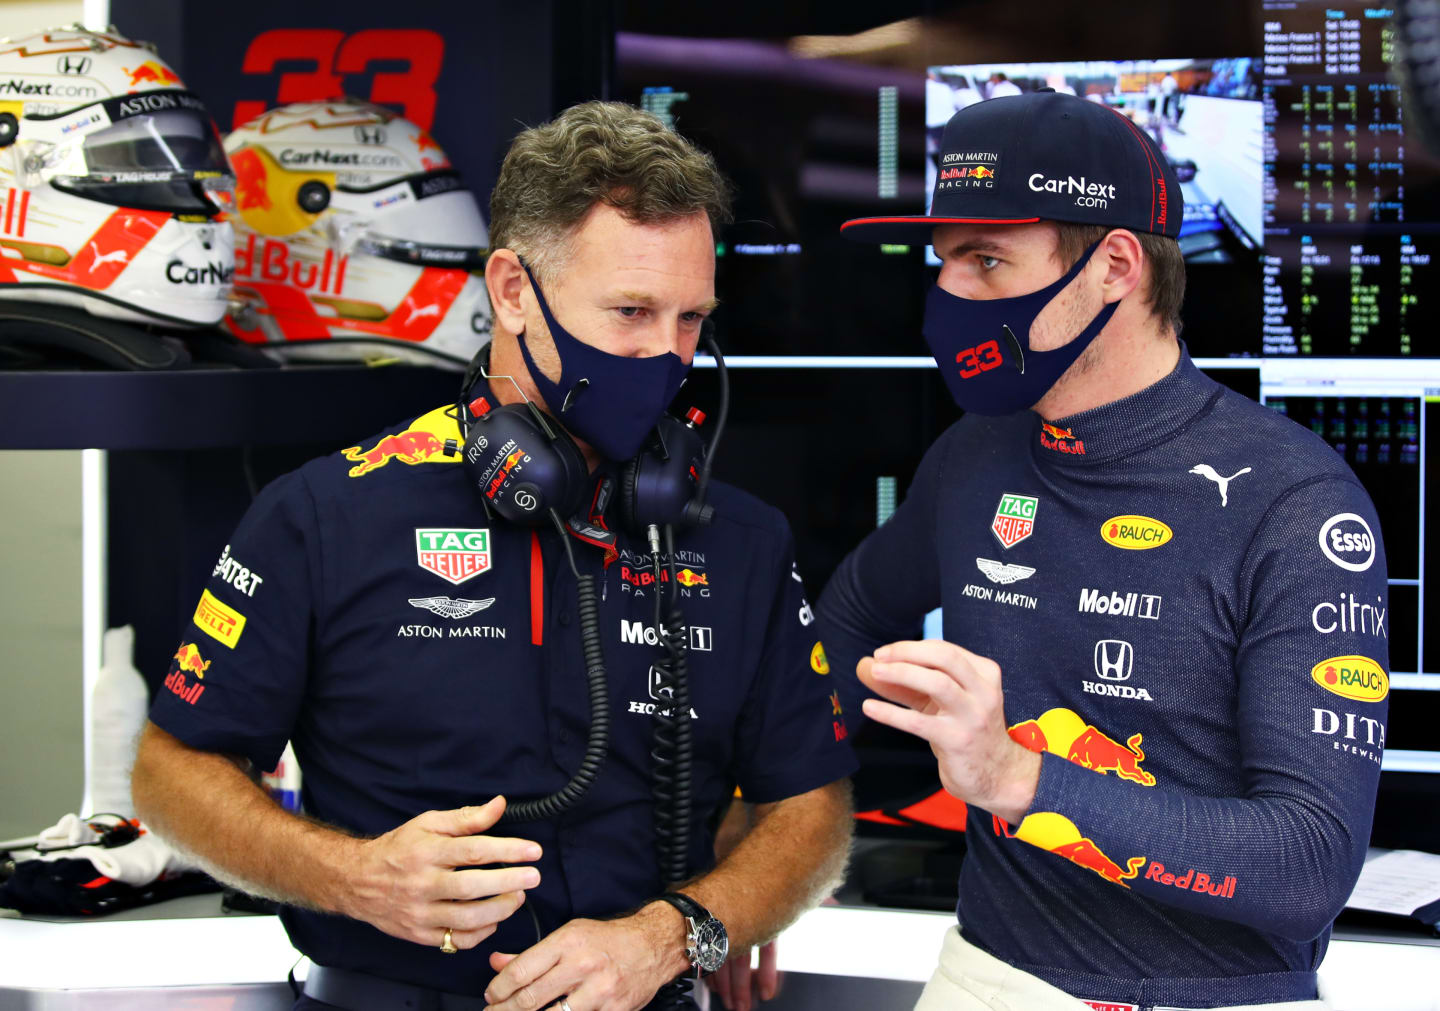 BAHRAIN, BAHRAIN - DECEMBER 05: Red Bull Racing Team Principal Christian Horner speaks with Max Verstappen of Netherlands and Red Bull Racing in the garage before qualifying ahead of the F1 Grand Prix of Sakhir at Bahrain International Circuit on December 05, 2020 in Bahrain, Bahrain. (Photo by Mark Thompson/Getty Images)